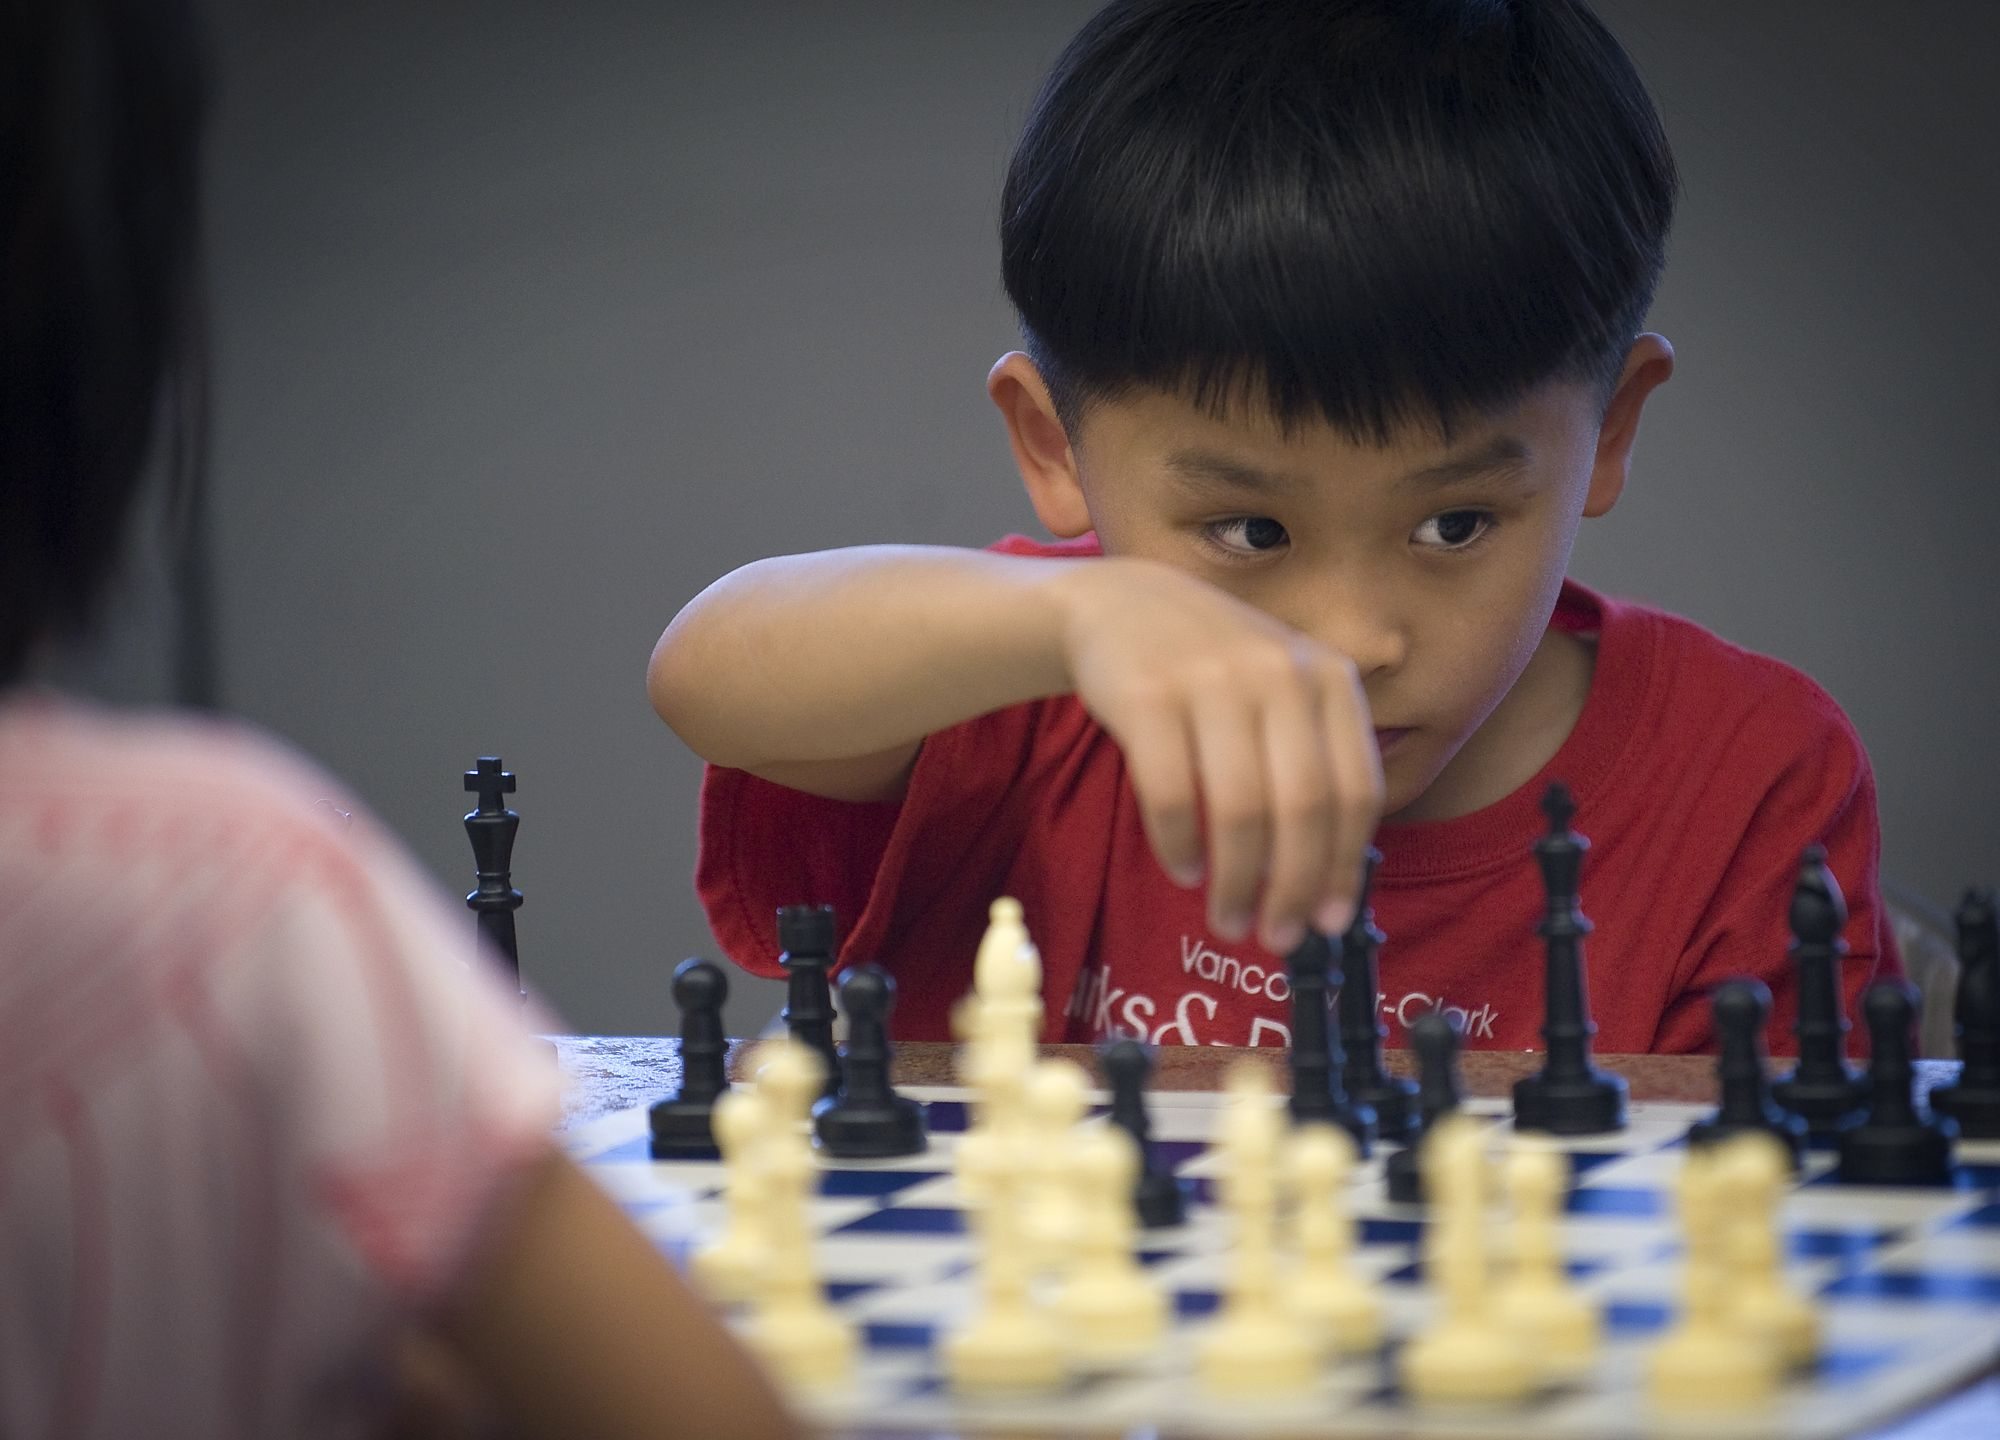 Jason Chang, 7, contemplates his next move while playing Plunder Chess against Alice Tang, 6, at EinsteinWise in east Vancouver.